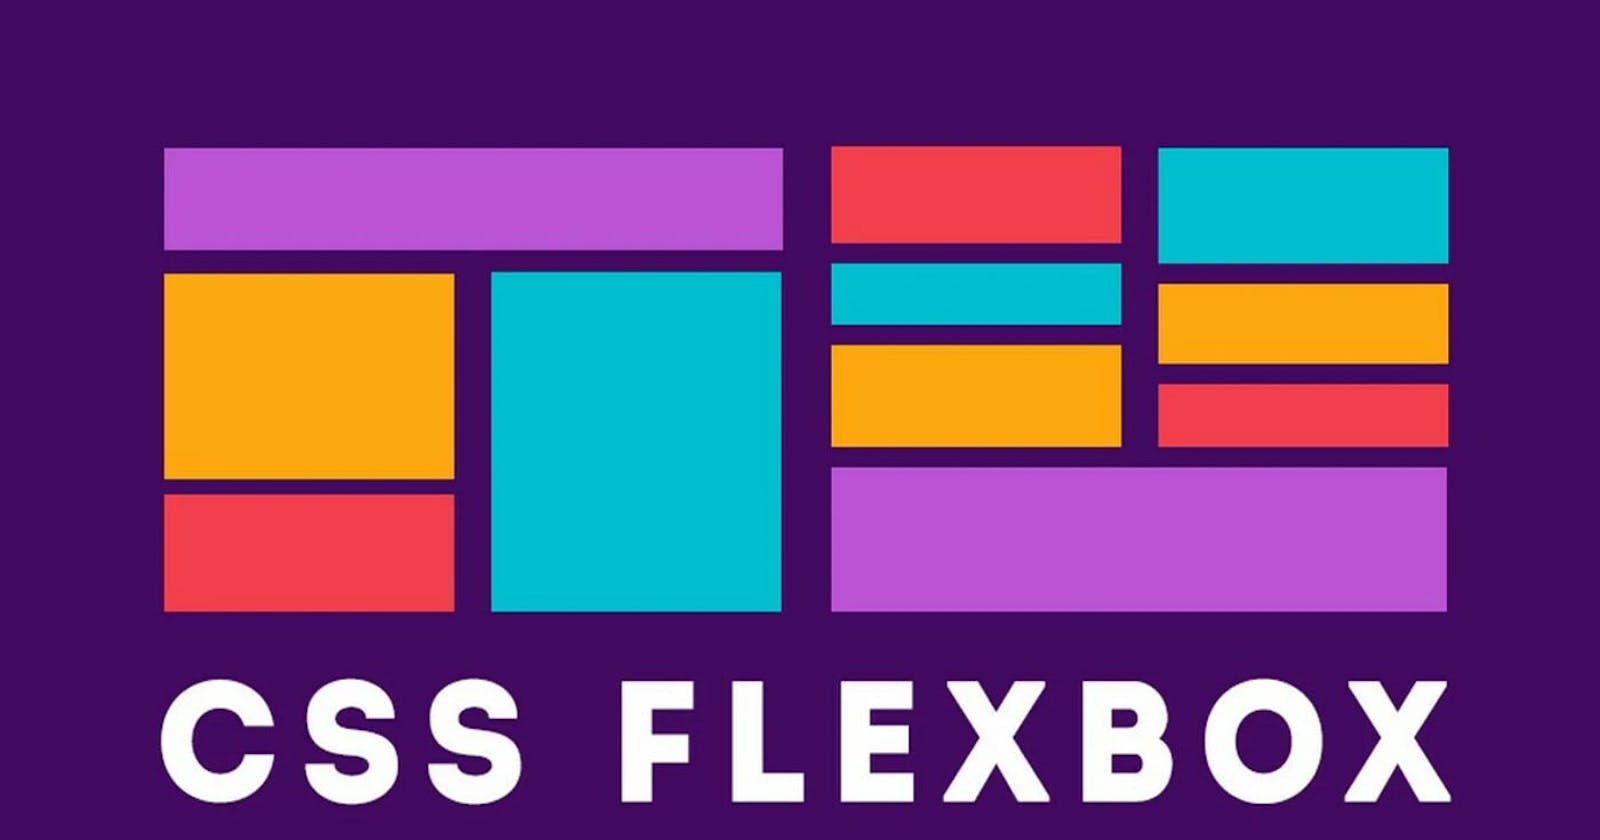 Mastering Flexbox: A Guide to CSS Flexible Box Layout